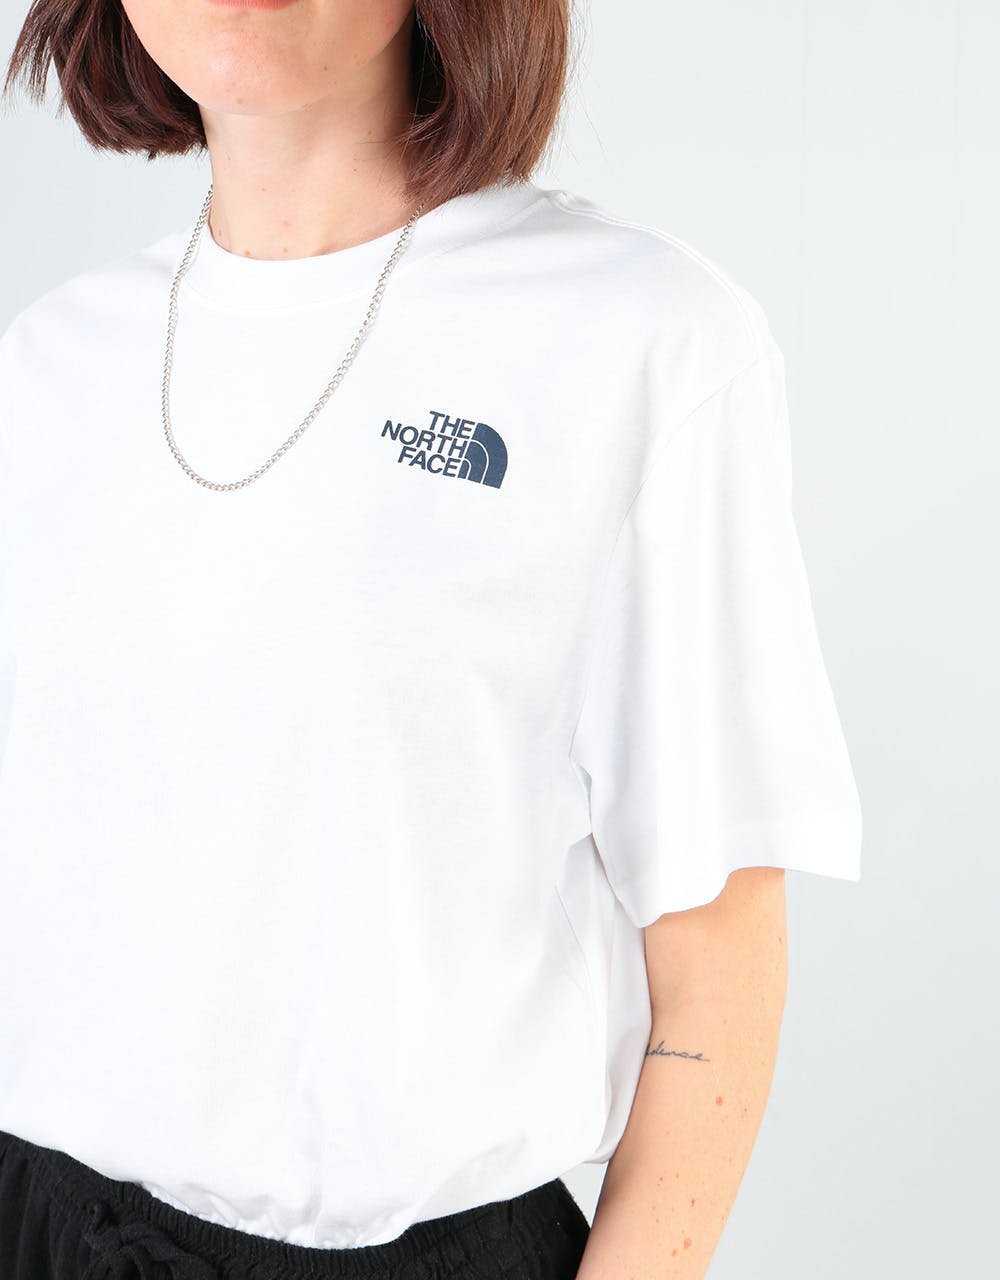 The North Face Womens S/S Redbox Celebration Oversized T-Shirt - White